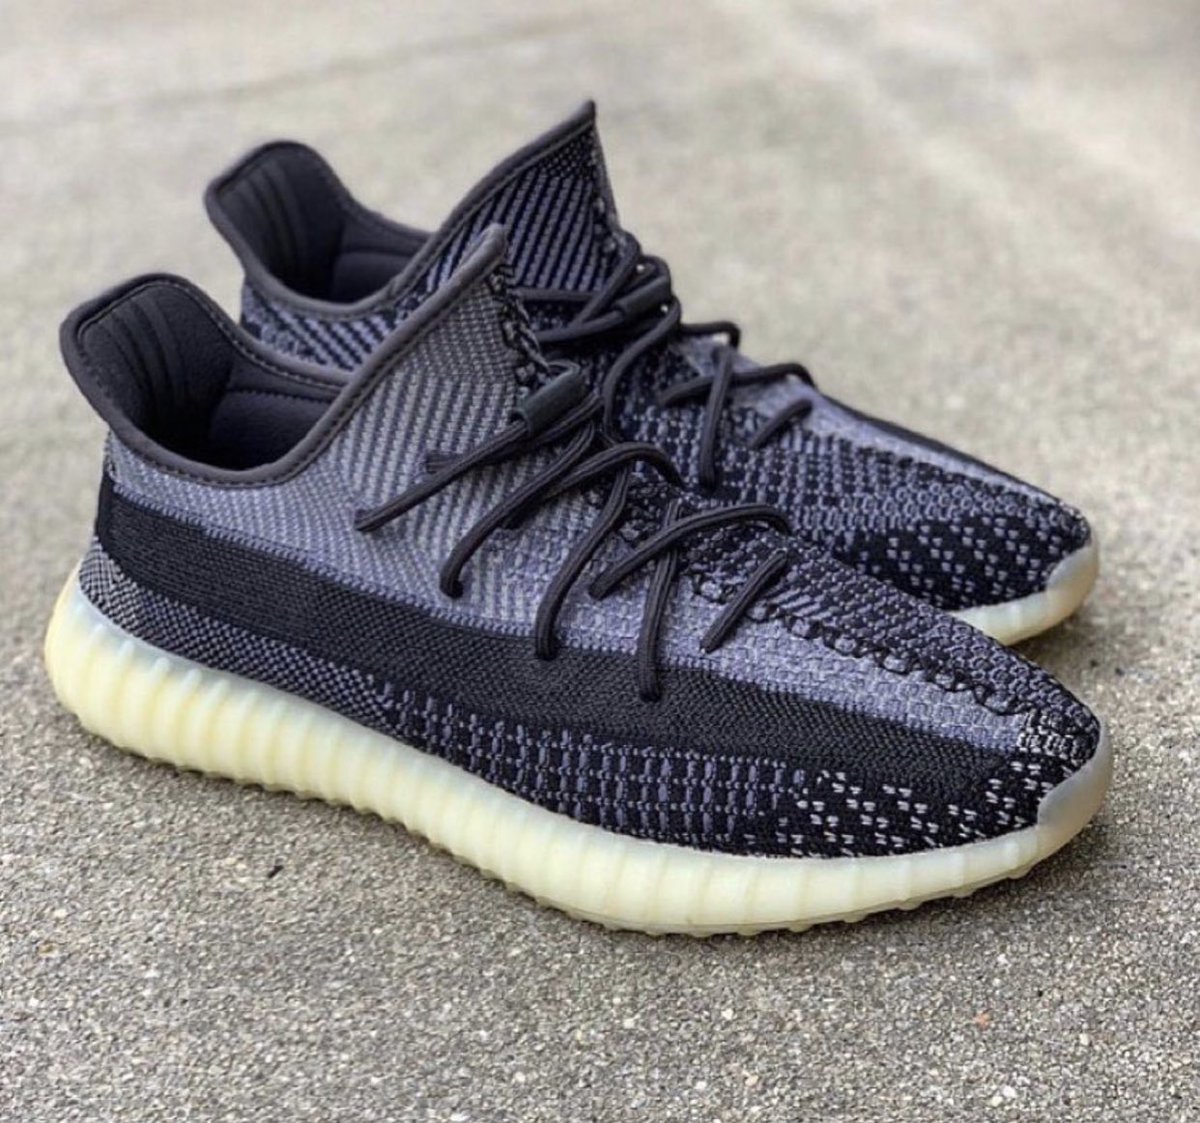 yeezy boost carbon 350